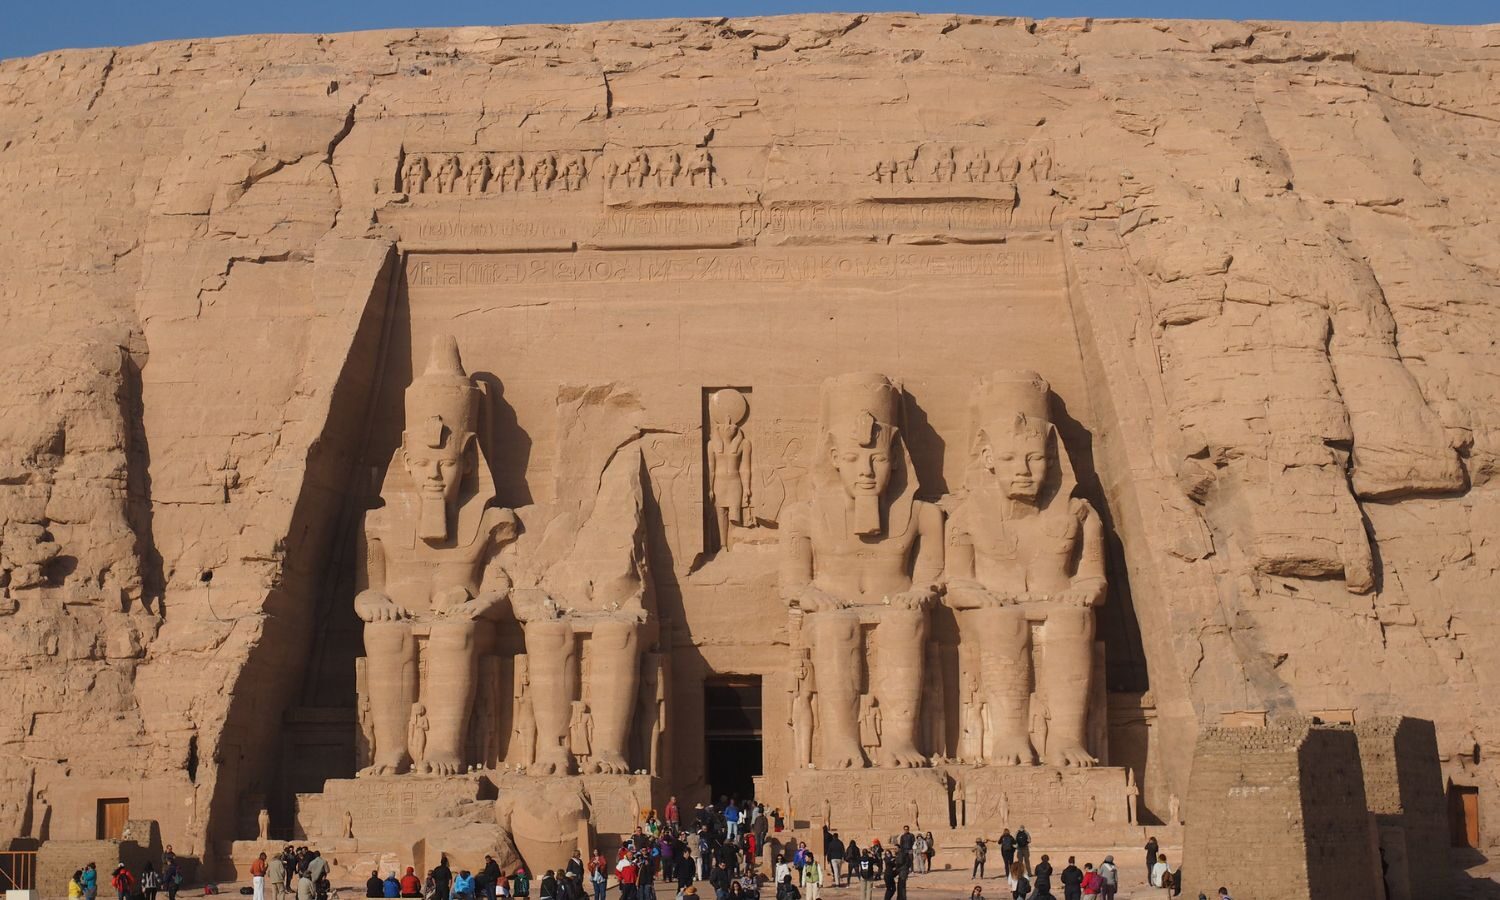 The temples at Abu Simbel in Egypt, shown with a crowd of tourists exploring them